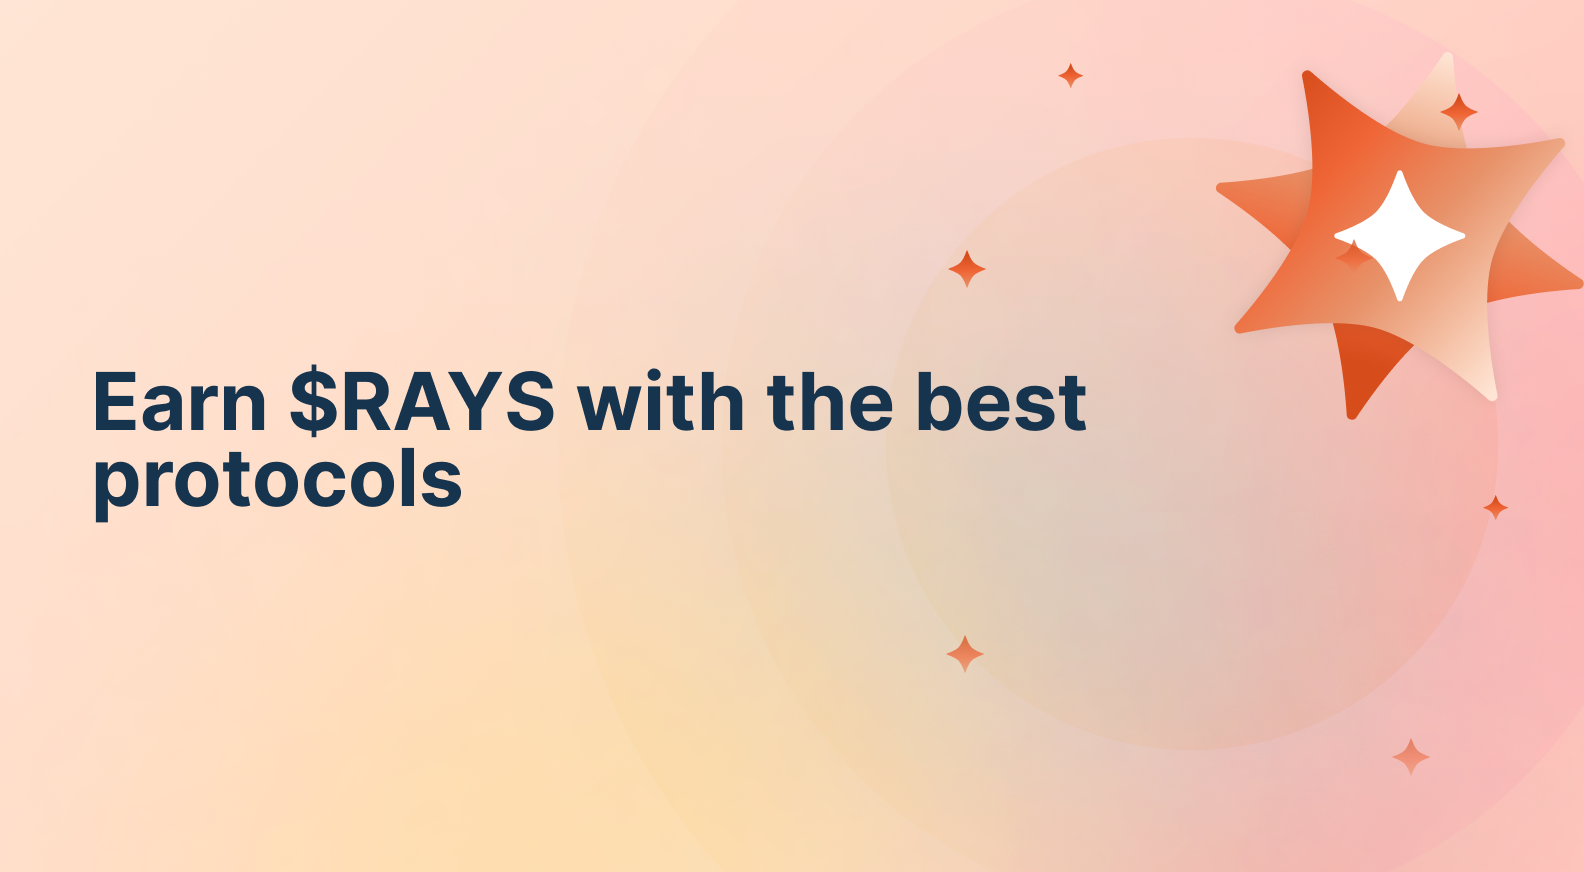 The simplest way to earn $RAYS with the best protocols